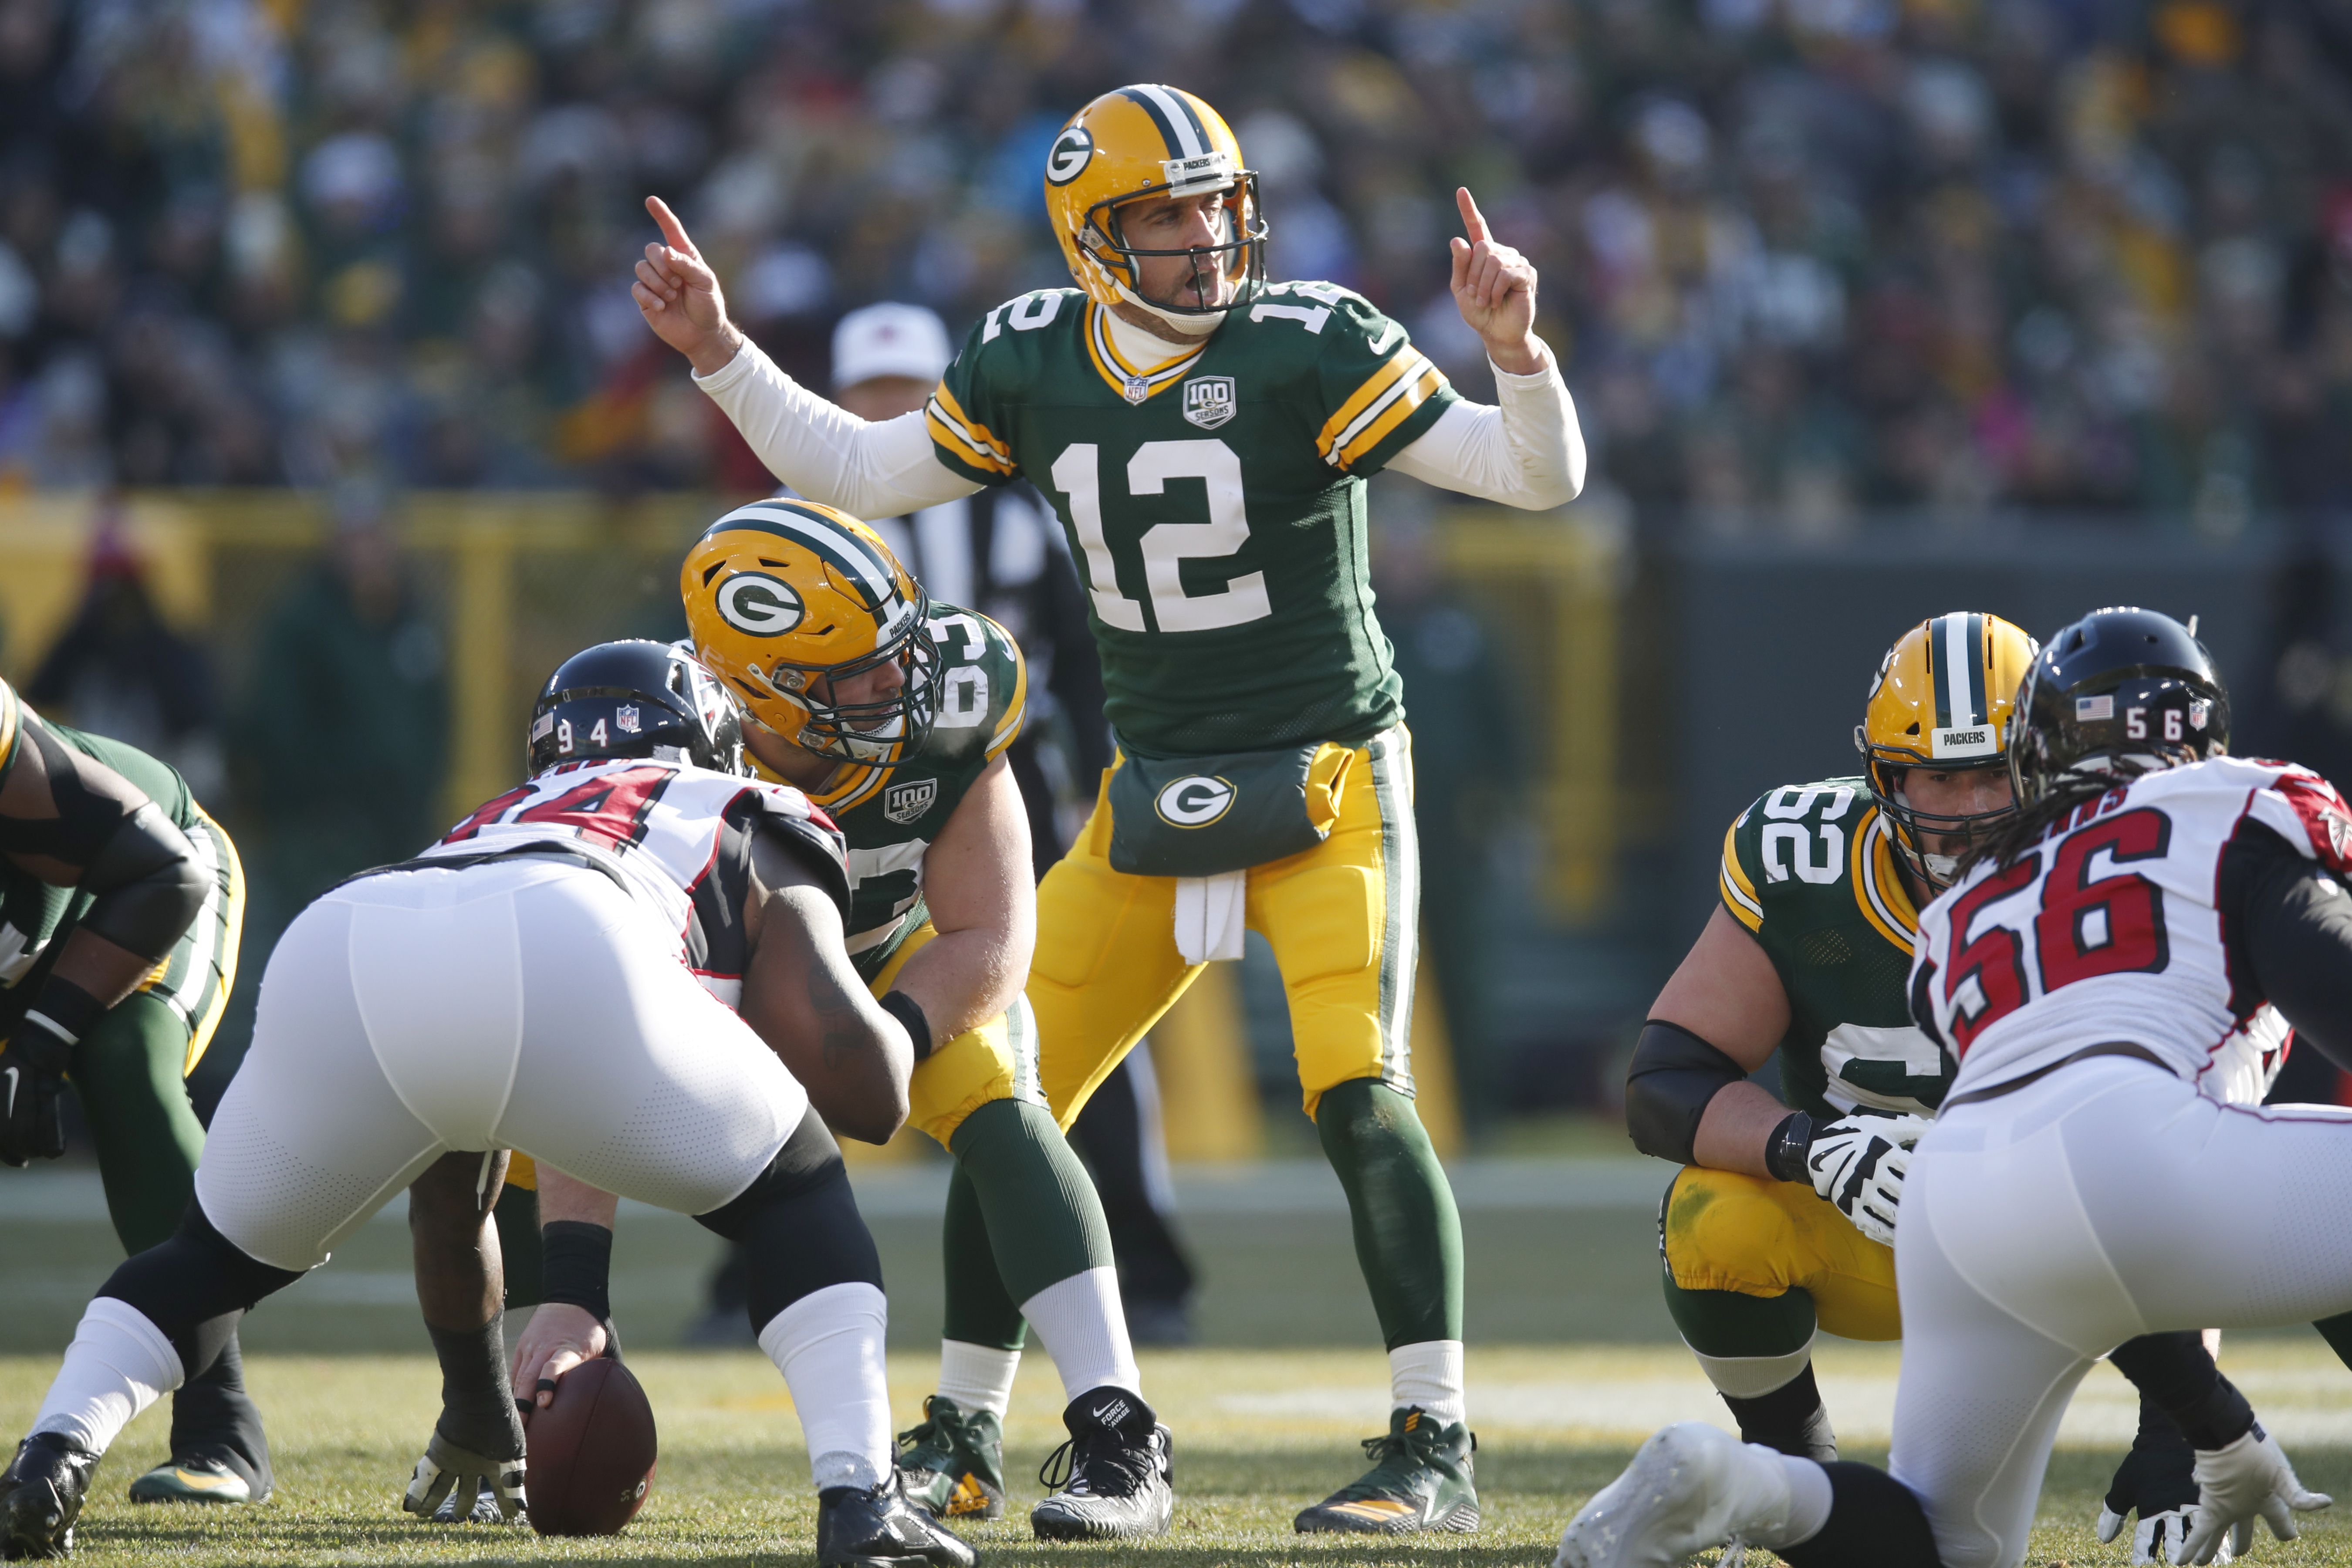 How to watch NFL Monday Night Football with Falcons vs. Packers